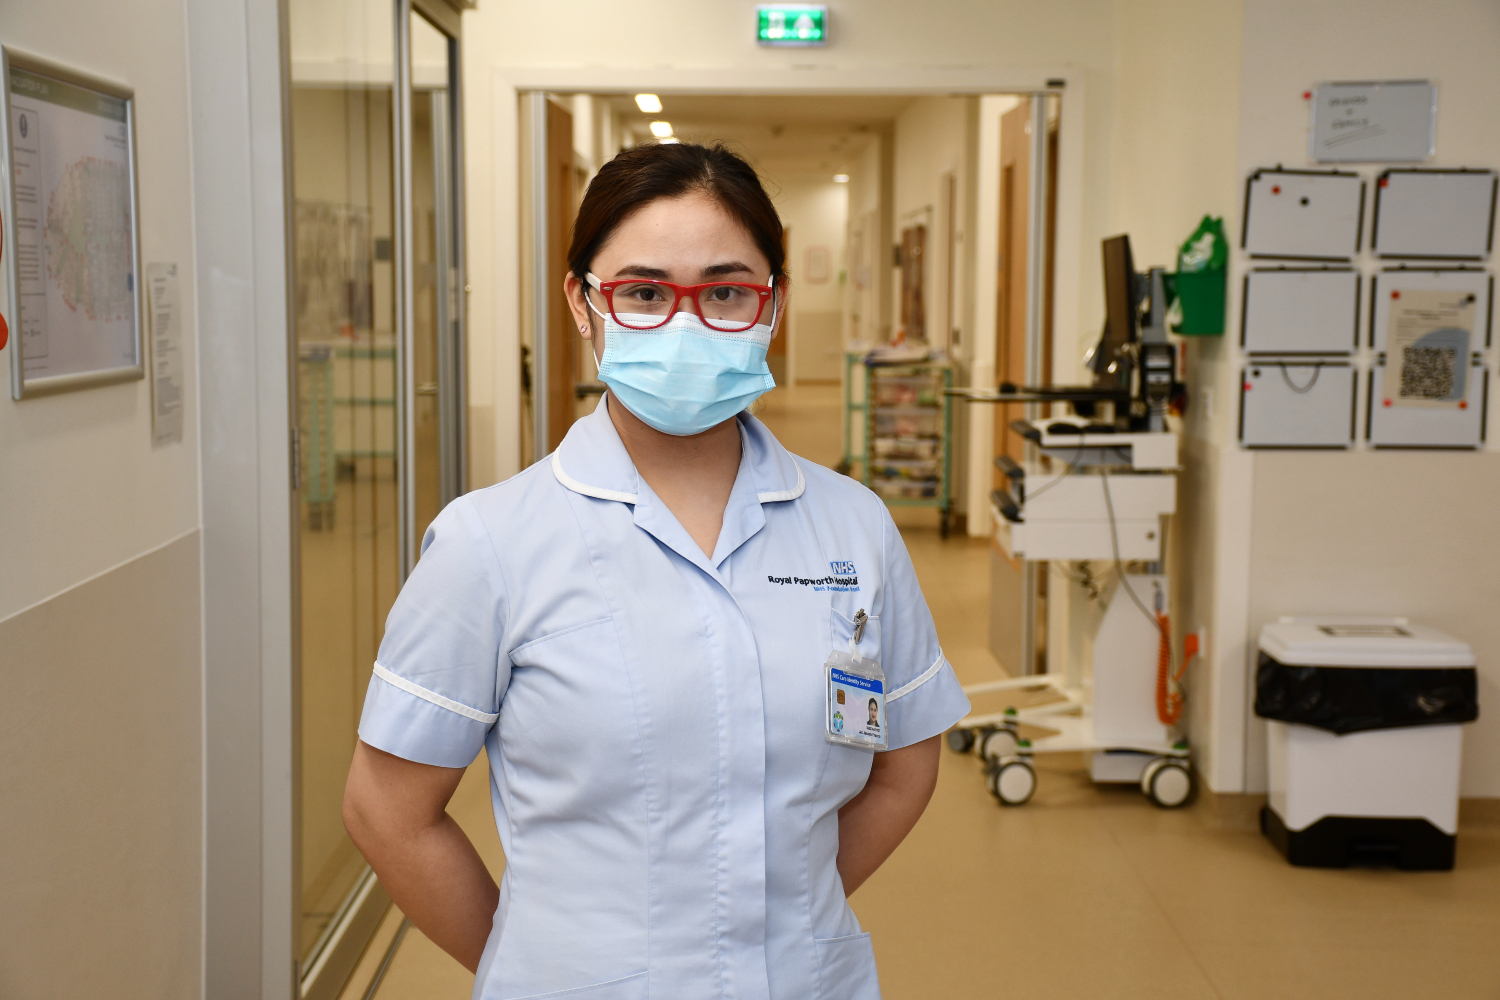 Nurse with red glasses stands in a corridor